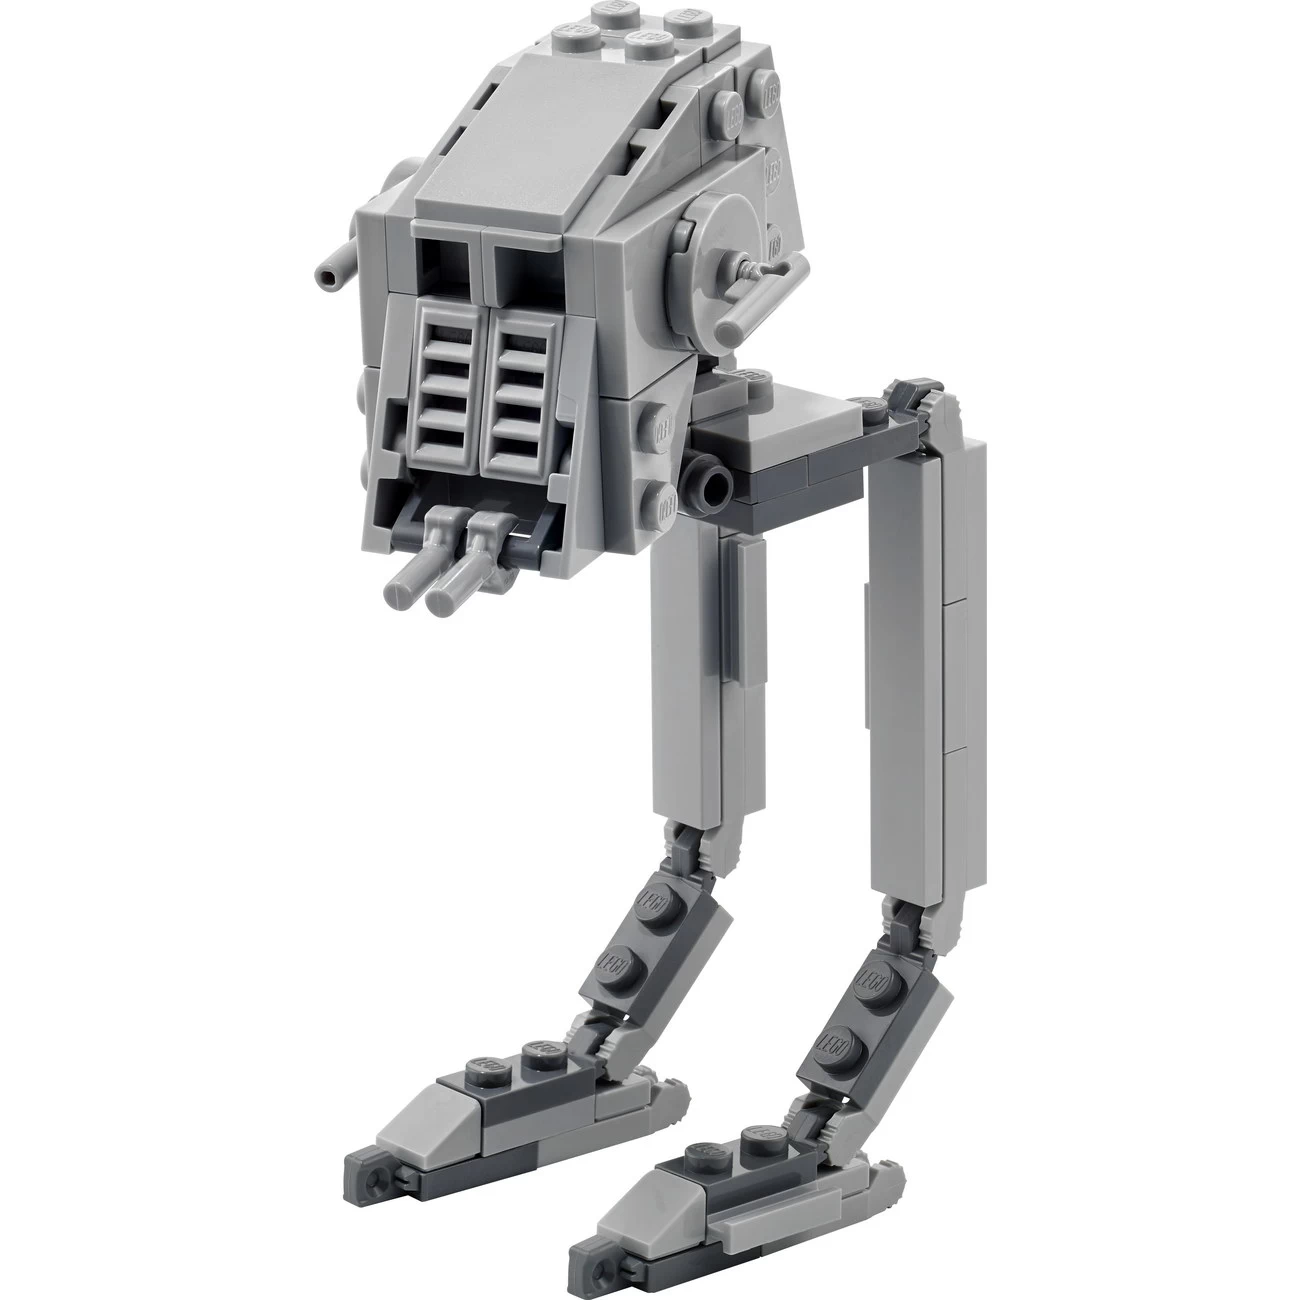 LEGO Star Wars - AT-ST (30495) - Polybag